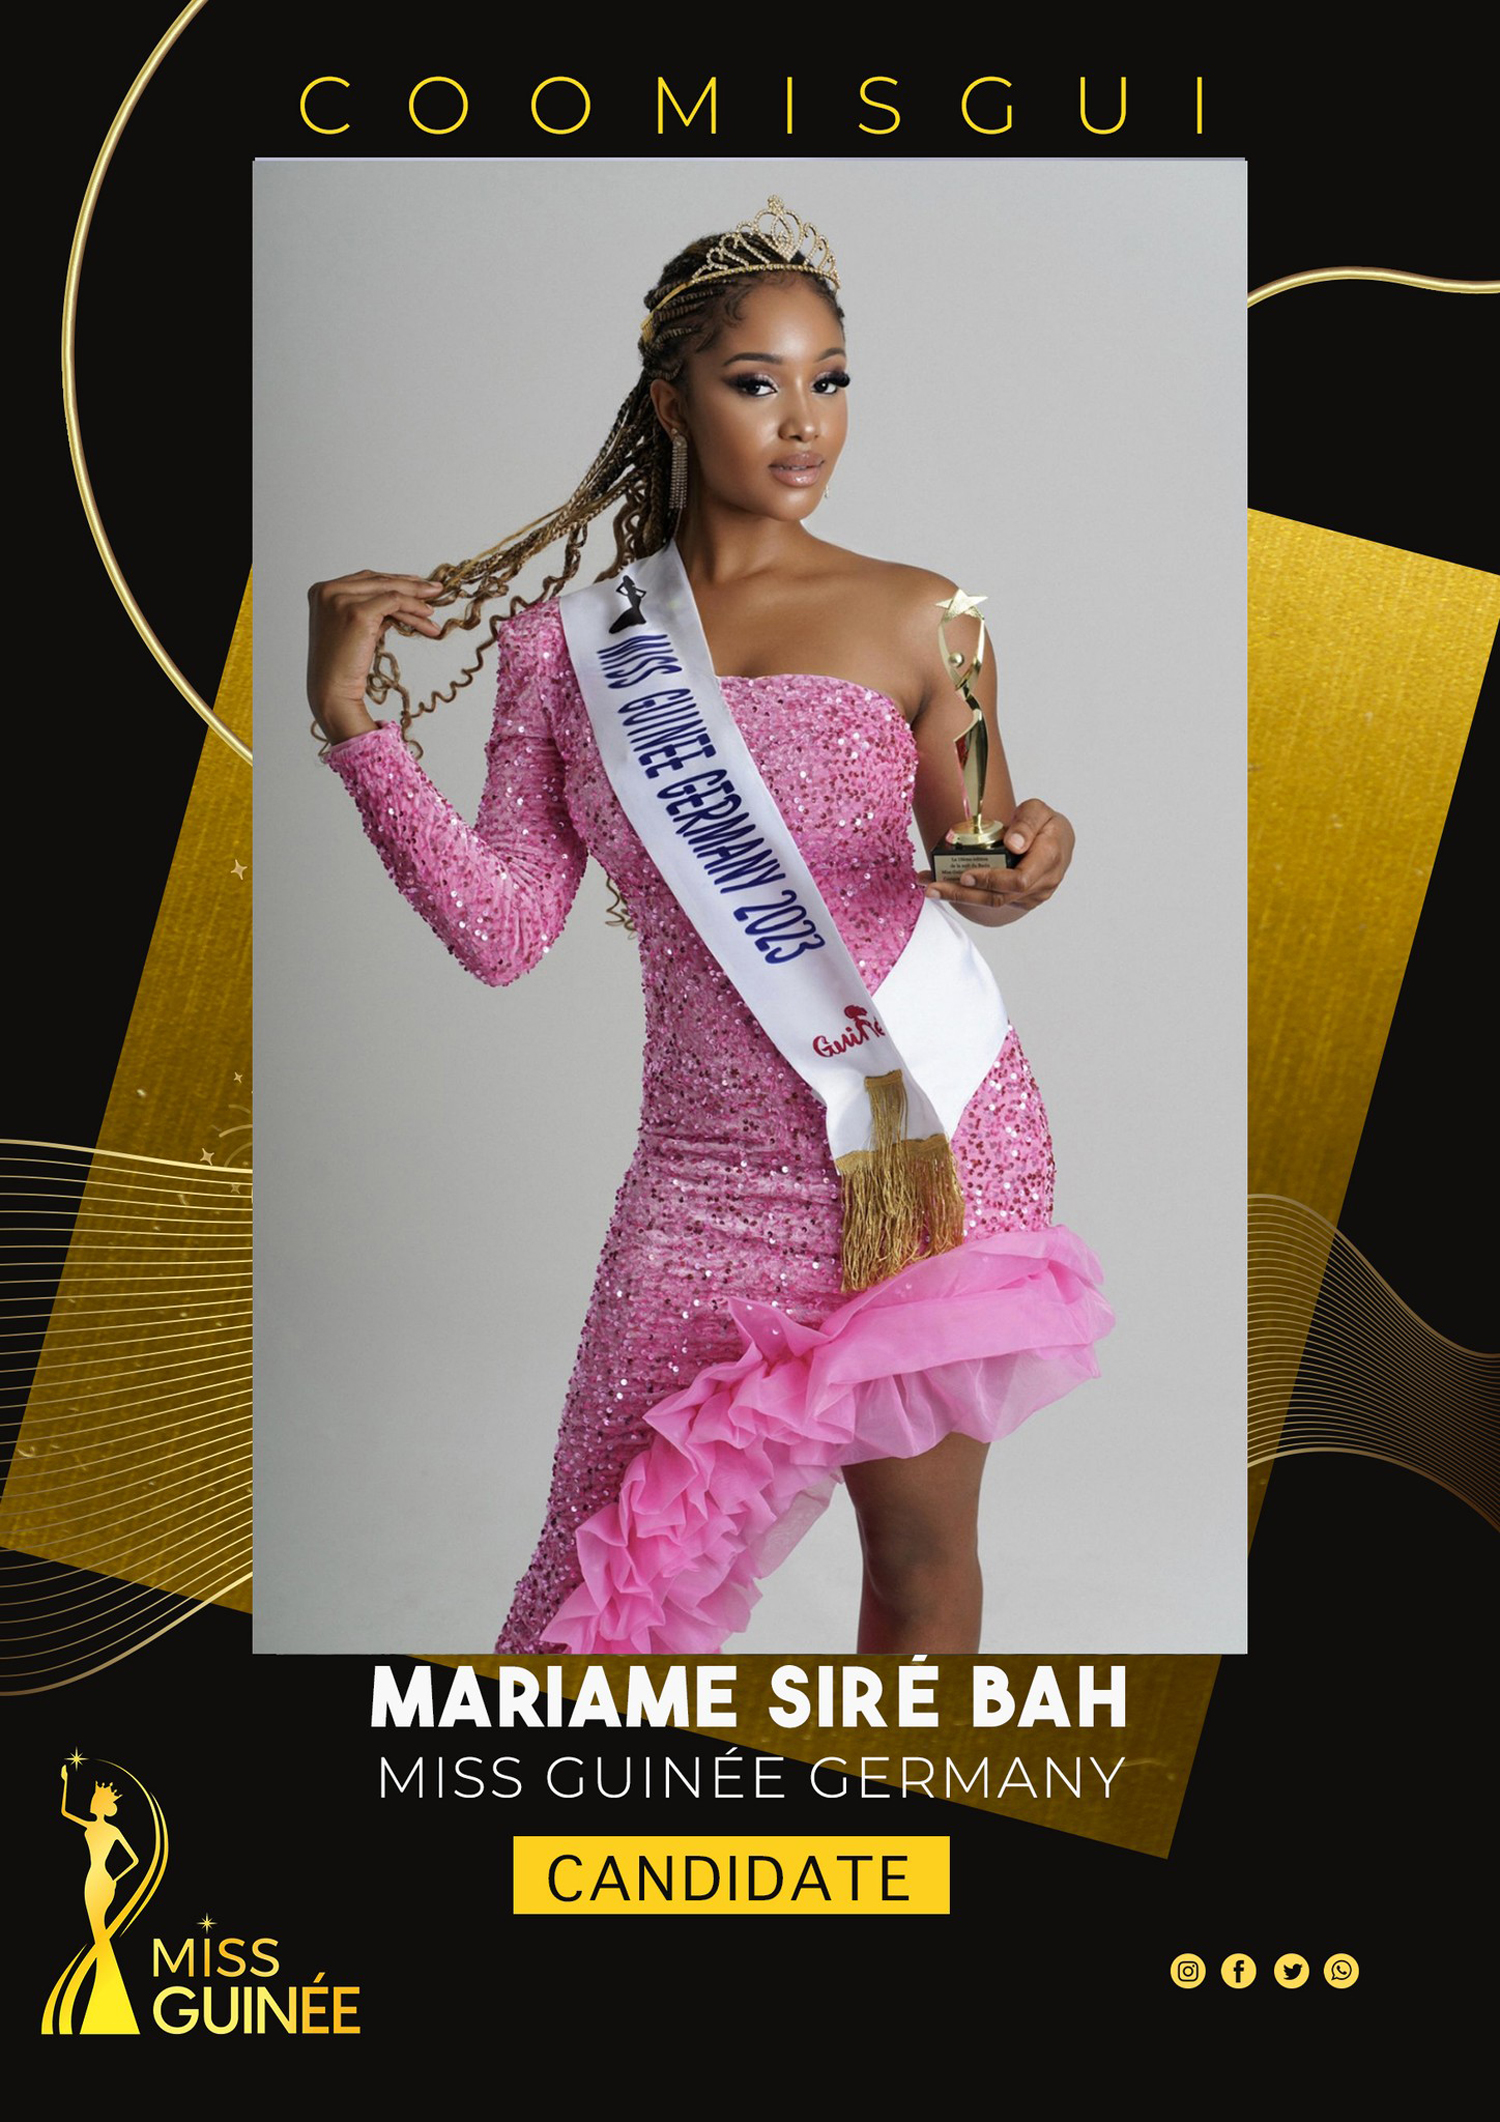 COOMISGUI-MRS-AMINATA-DIALLO-PRESENTS-THE-FINALIST-OF-MISS-GUINEE-2023-MISS-MARIAME-SIRE-BAH-MISS-GUINEE-GERMANY_CANDIDATE-DN-AFRICA-MEDIA-PARTNER